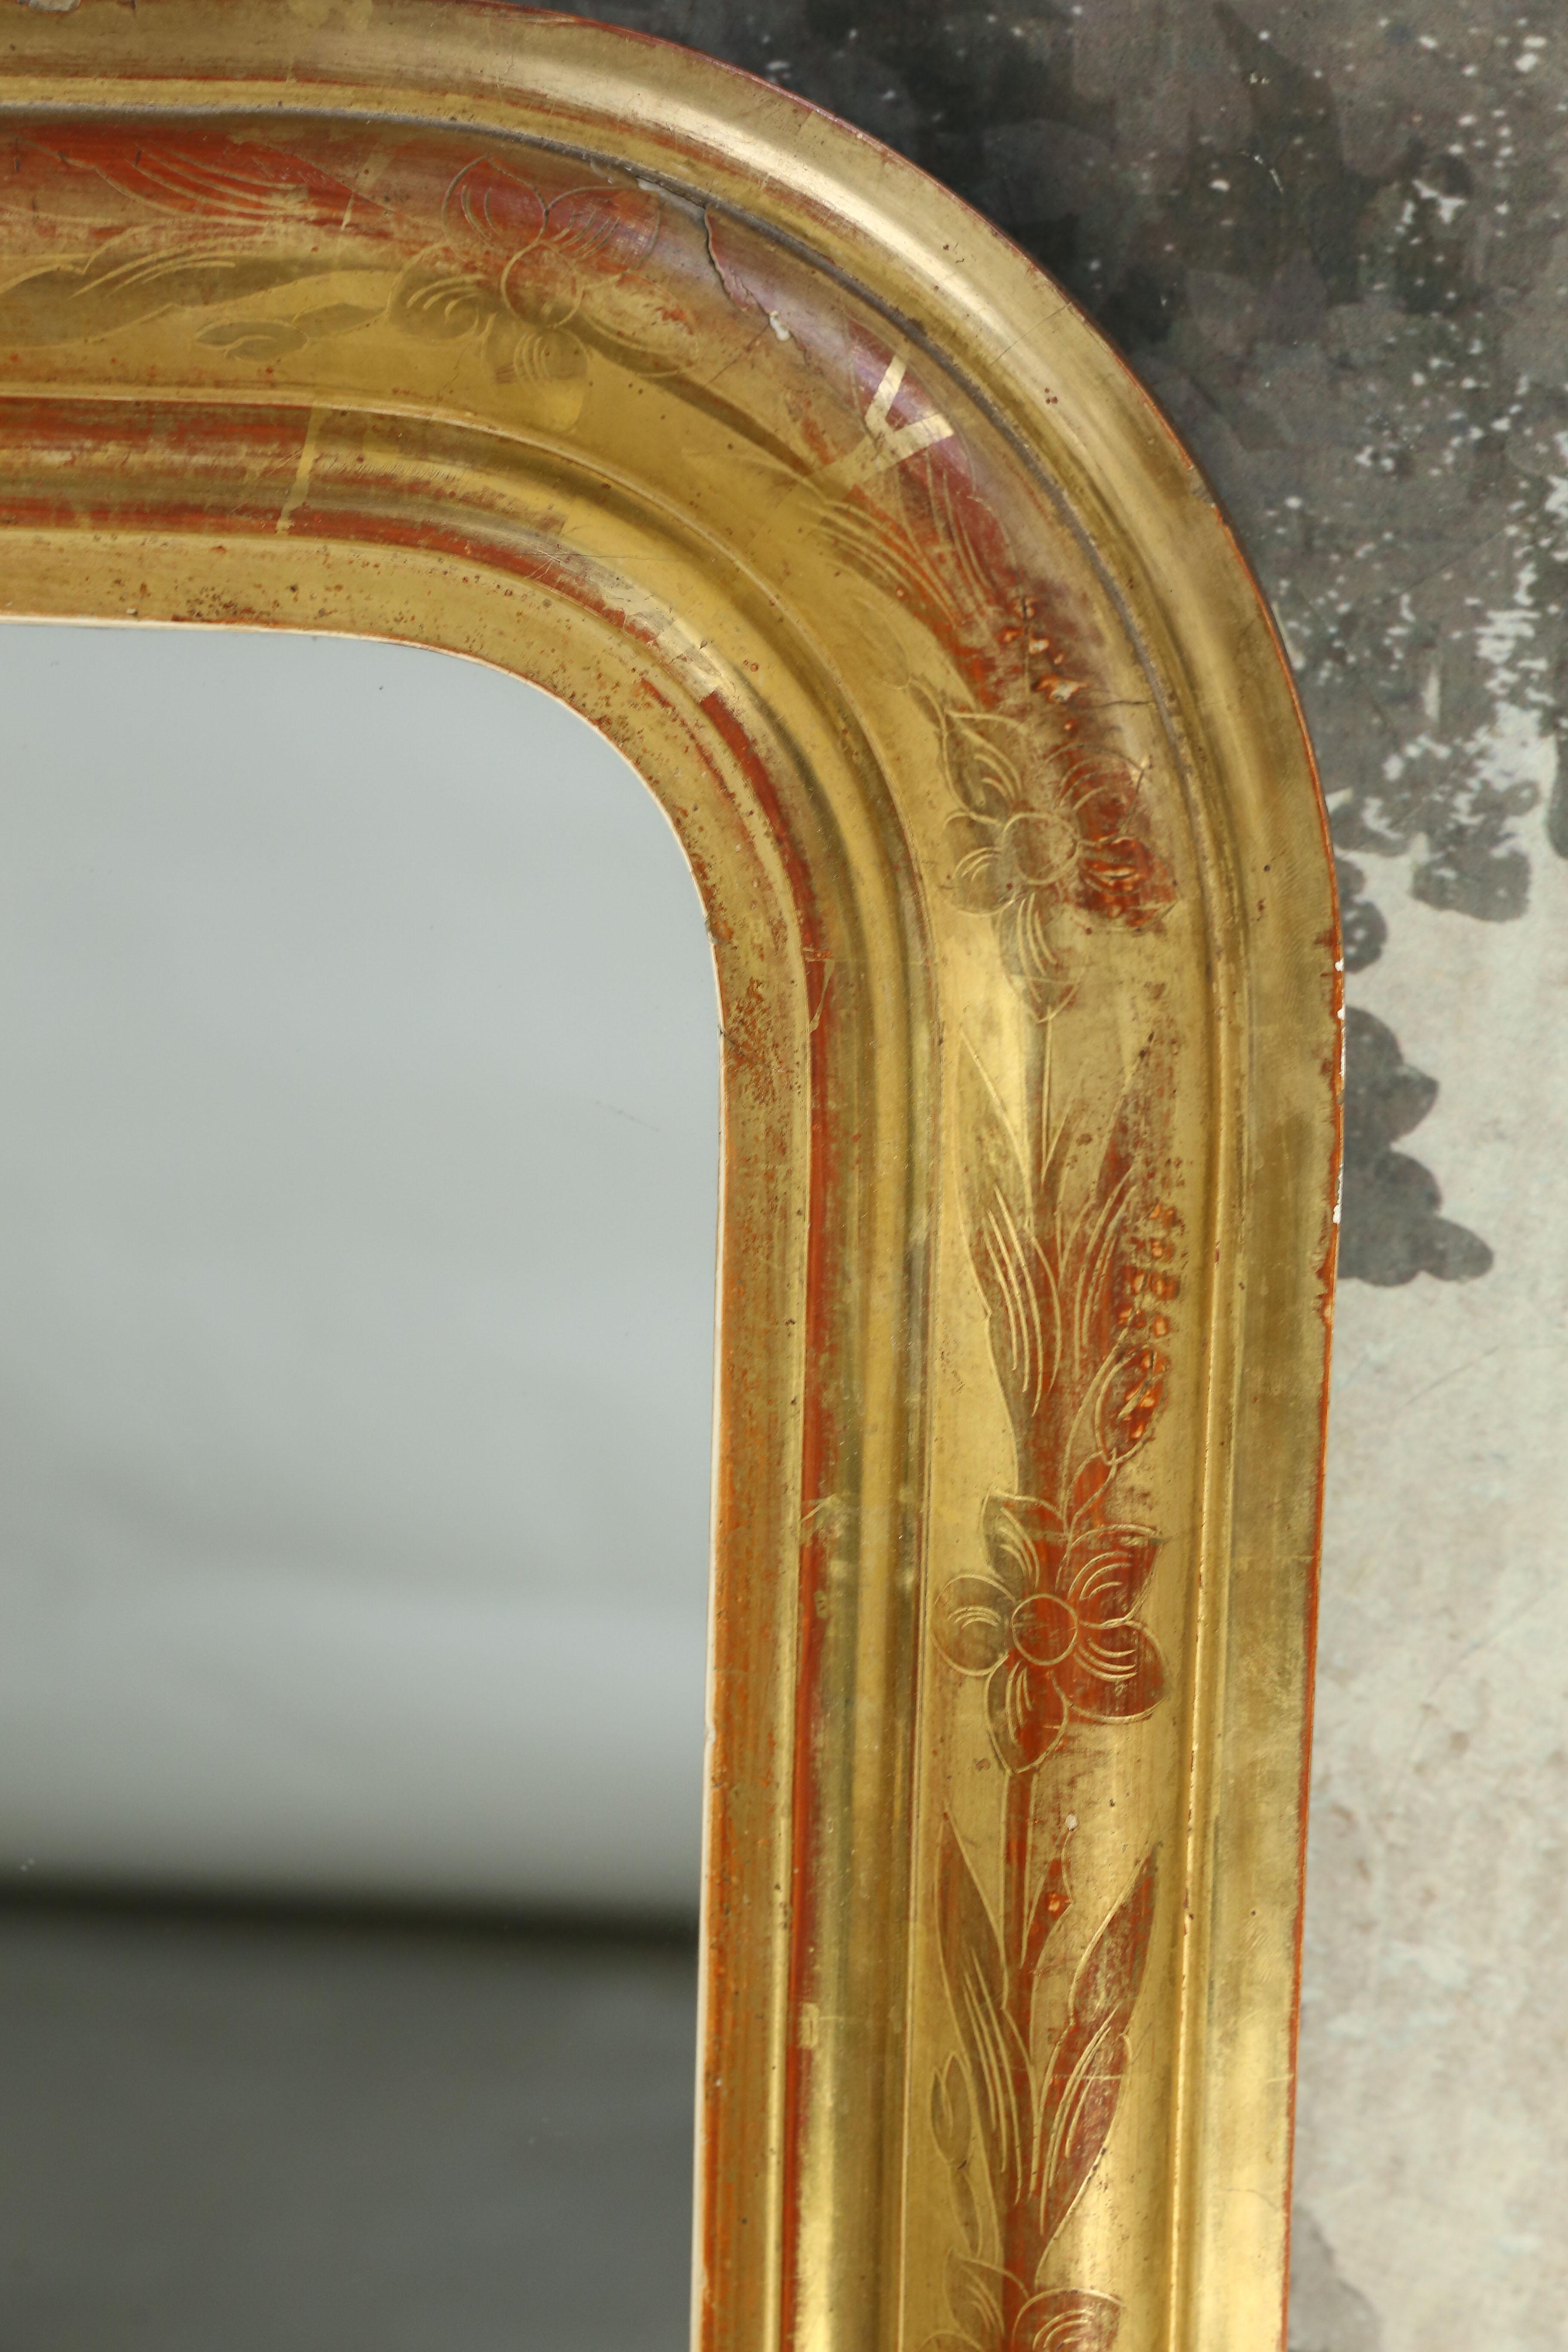 Beautiful French Louis Philippe mirror with intricate incised floral motifs. The glass mirror was probably added at a later date. Red and yellow bole has been used on this wonderful Louis Philippe giltwood mirror from the 19th century.